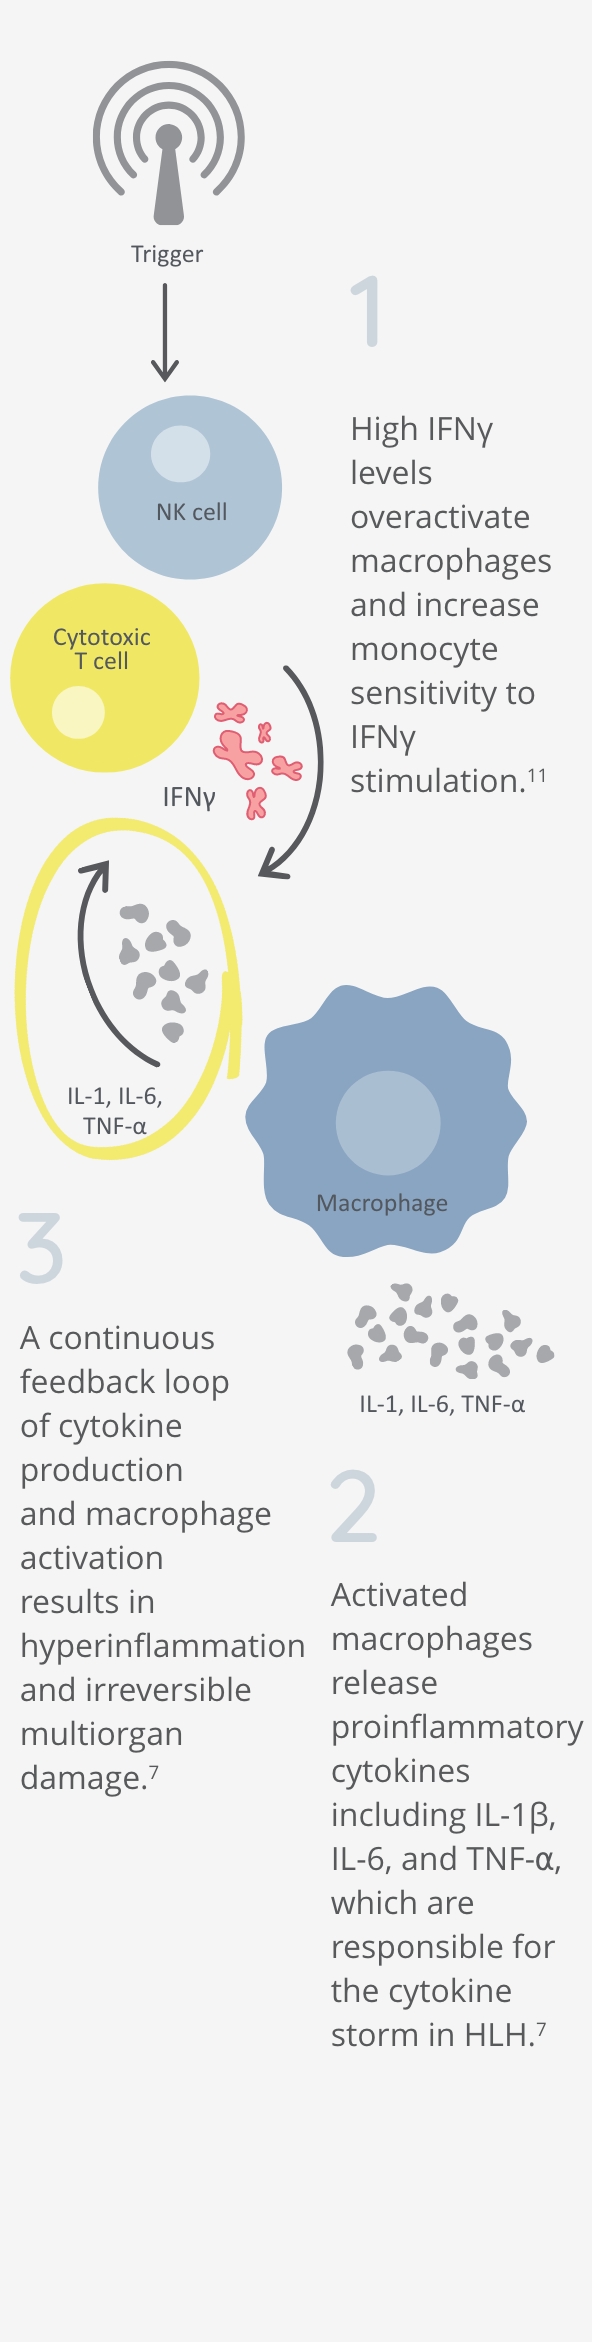 HLH feedback loop of T-cell and macrophage activation with cytokine release